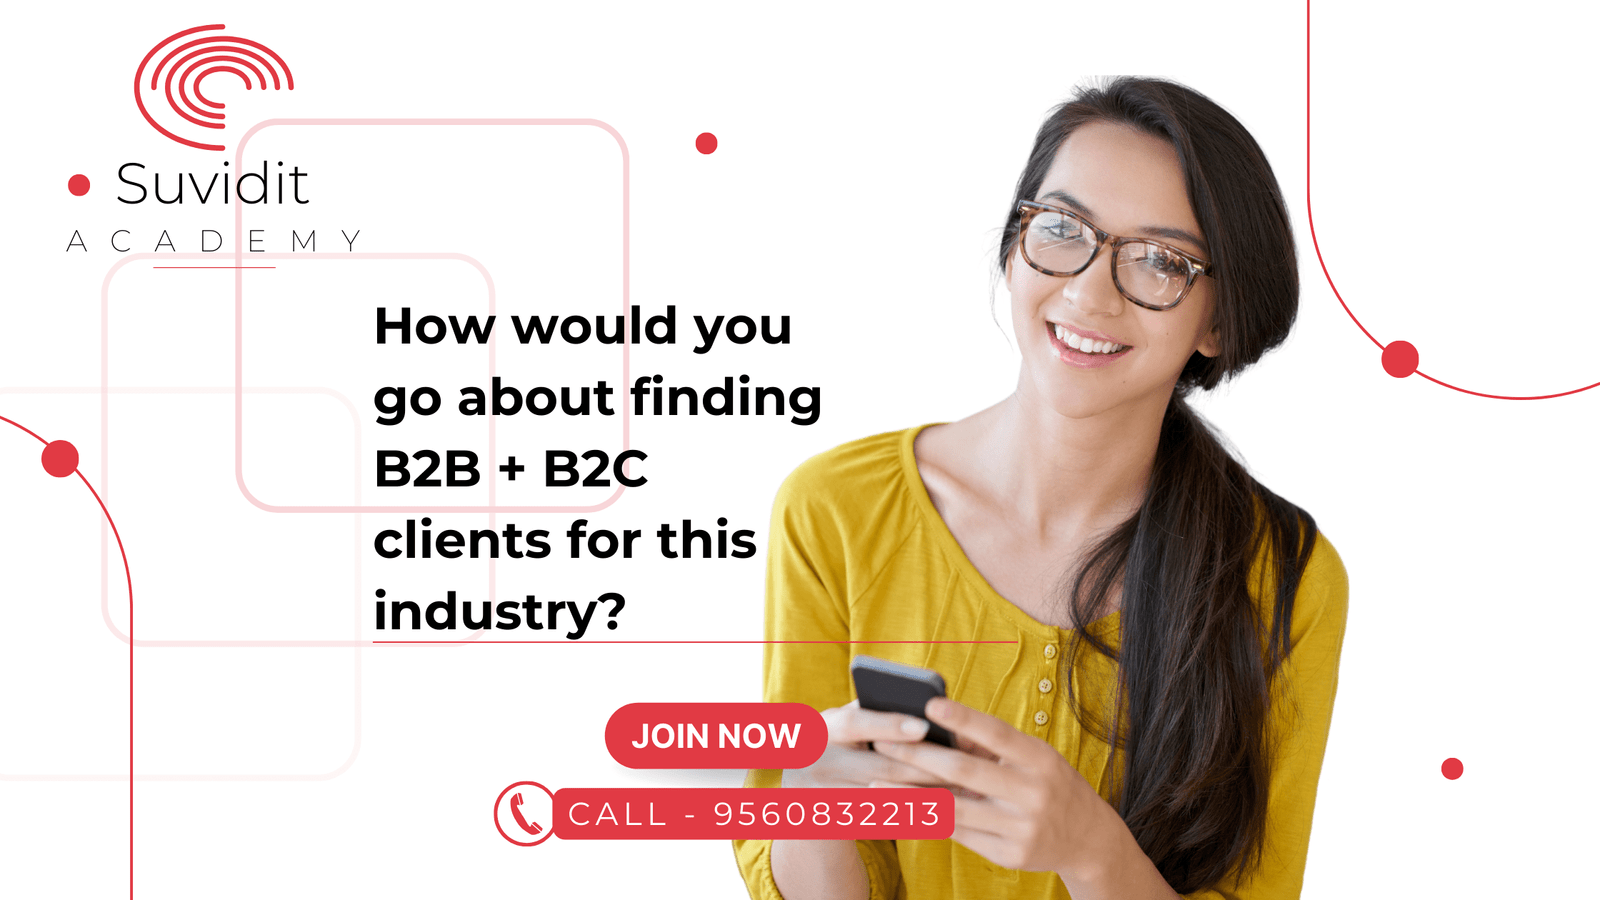 How would you go about finding B2B + B2C clients for this industry?